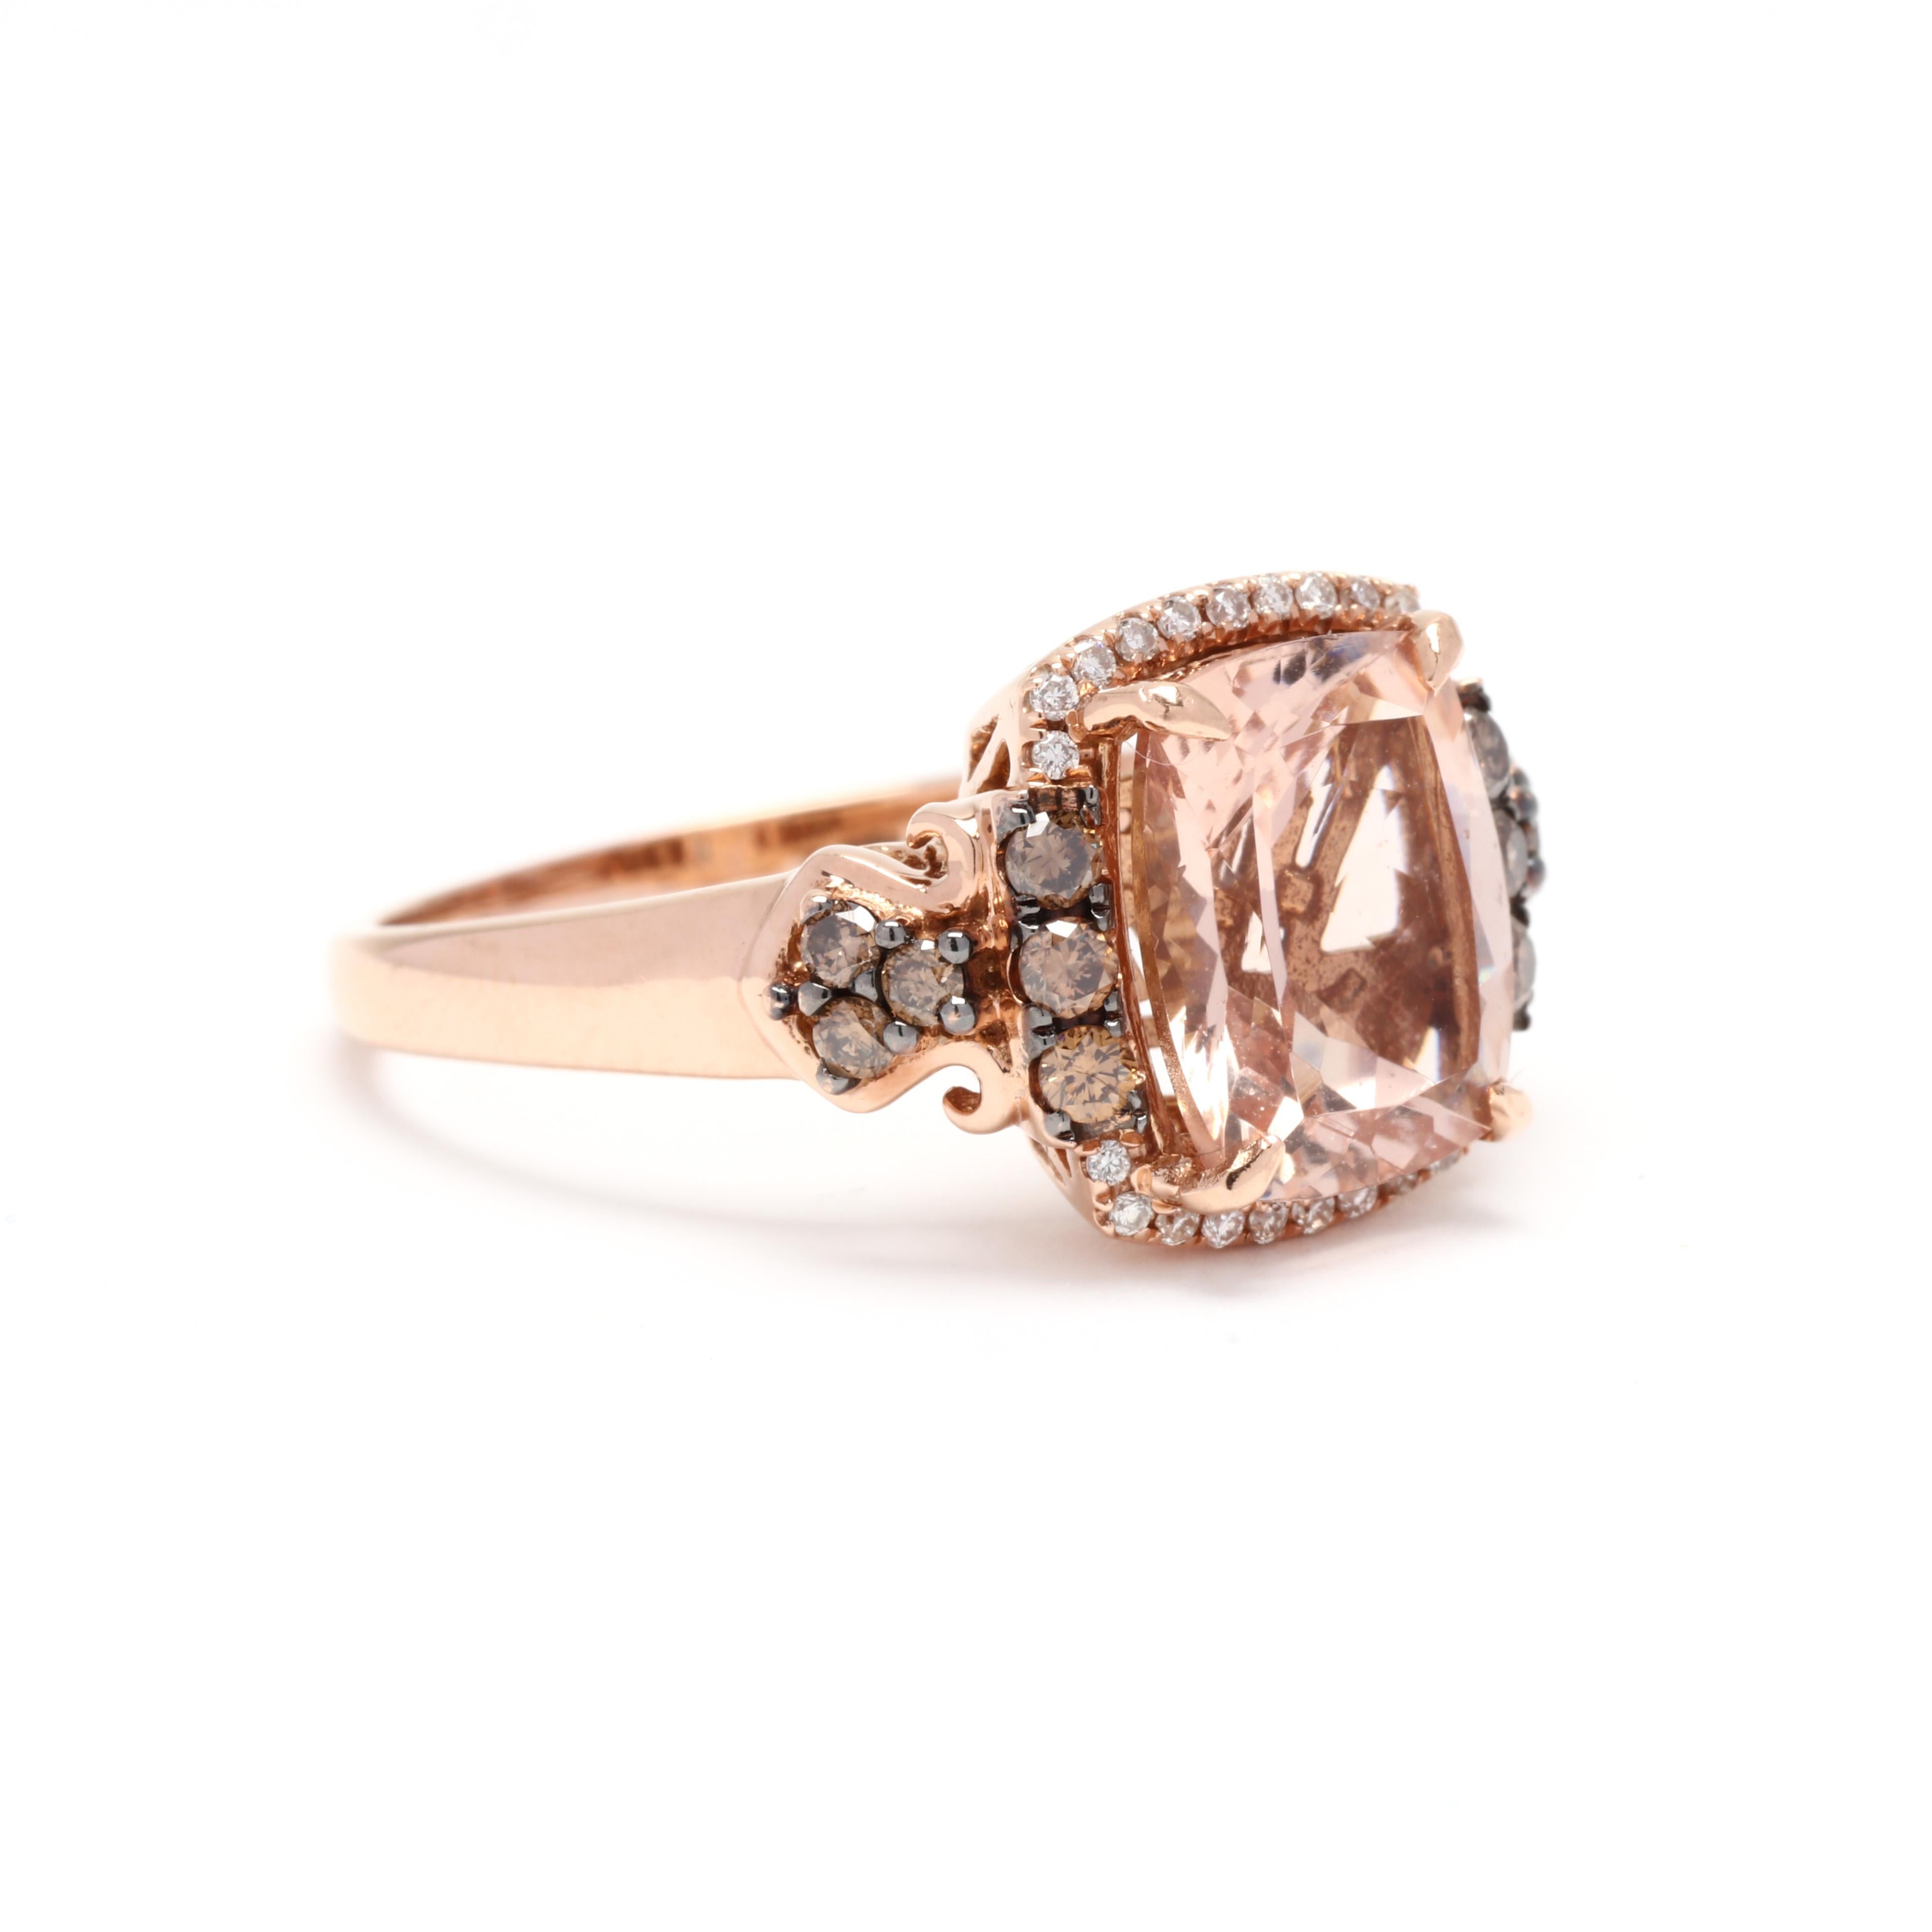 LeVian 14 karat rose gold morganite and diamond ring. This ring features a prong set, cushion cut morganite centerstone weighing approximately 2.50 carats surrounded by a halo of diamonds weighing approximately .08 total carats and with a cluster of